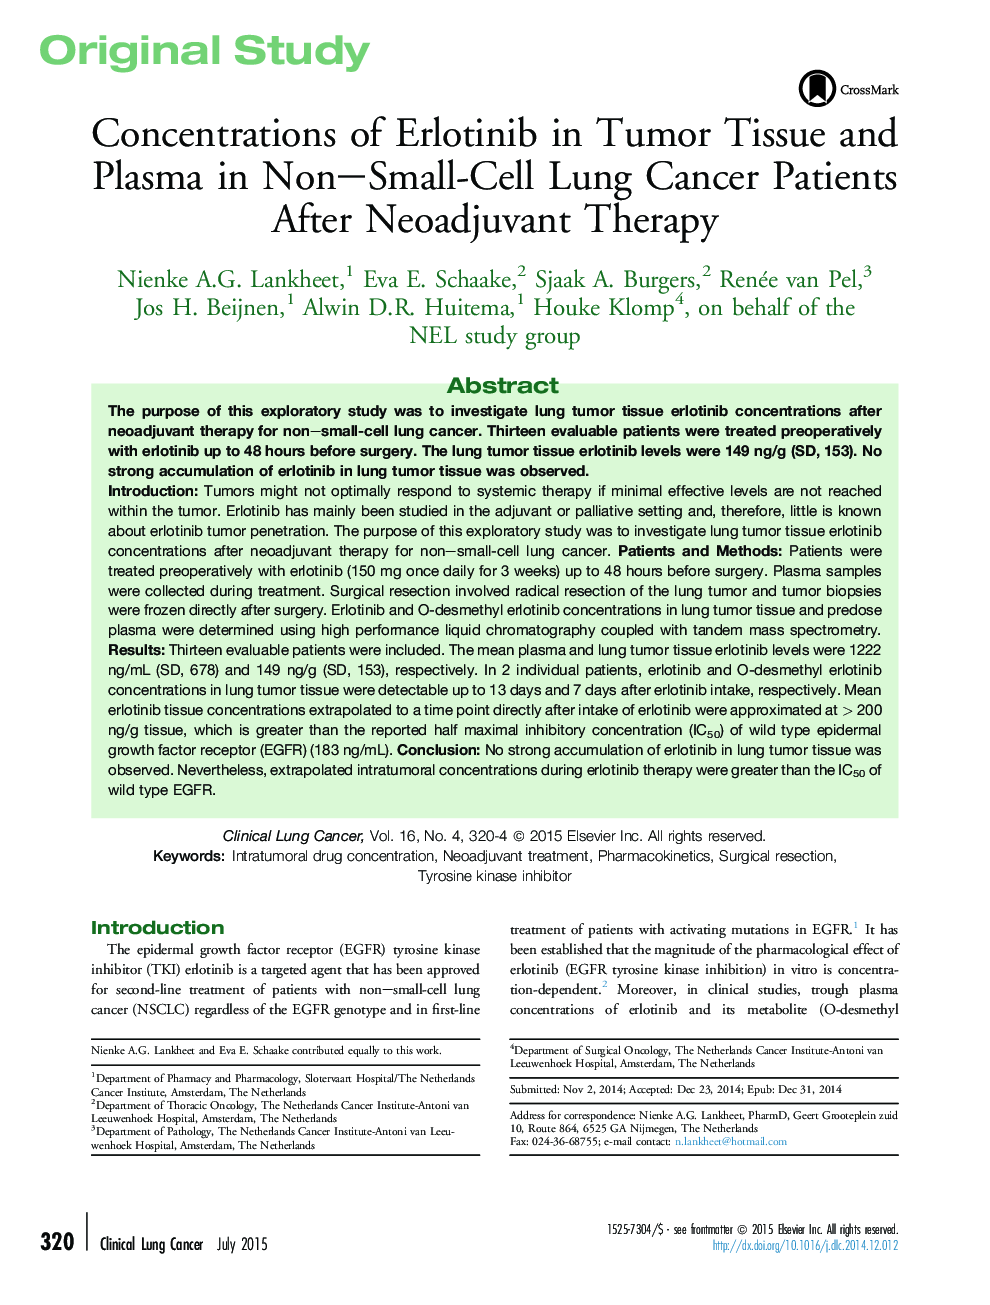 Concentrations of Erlotinib in Tumor Tissue and Plasma in Non–Small-Cell Lung Cancer Patients After Neoadjuvant Therapy 